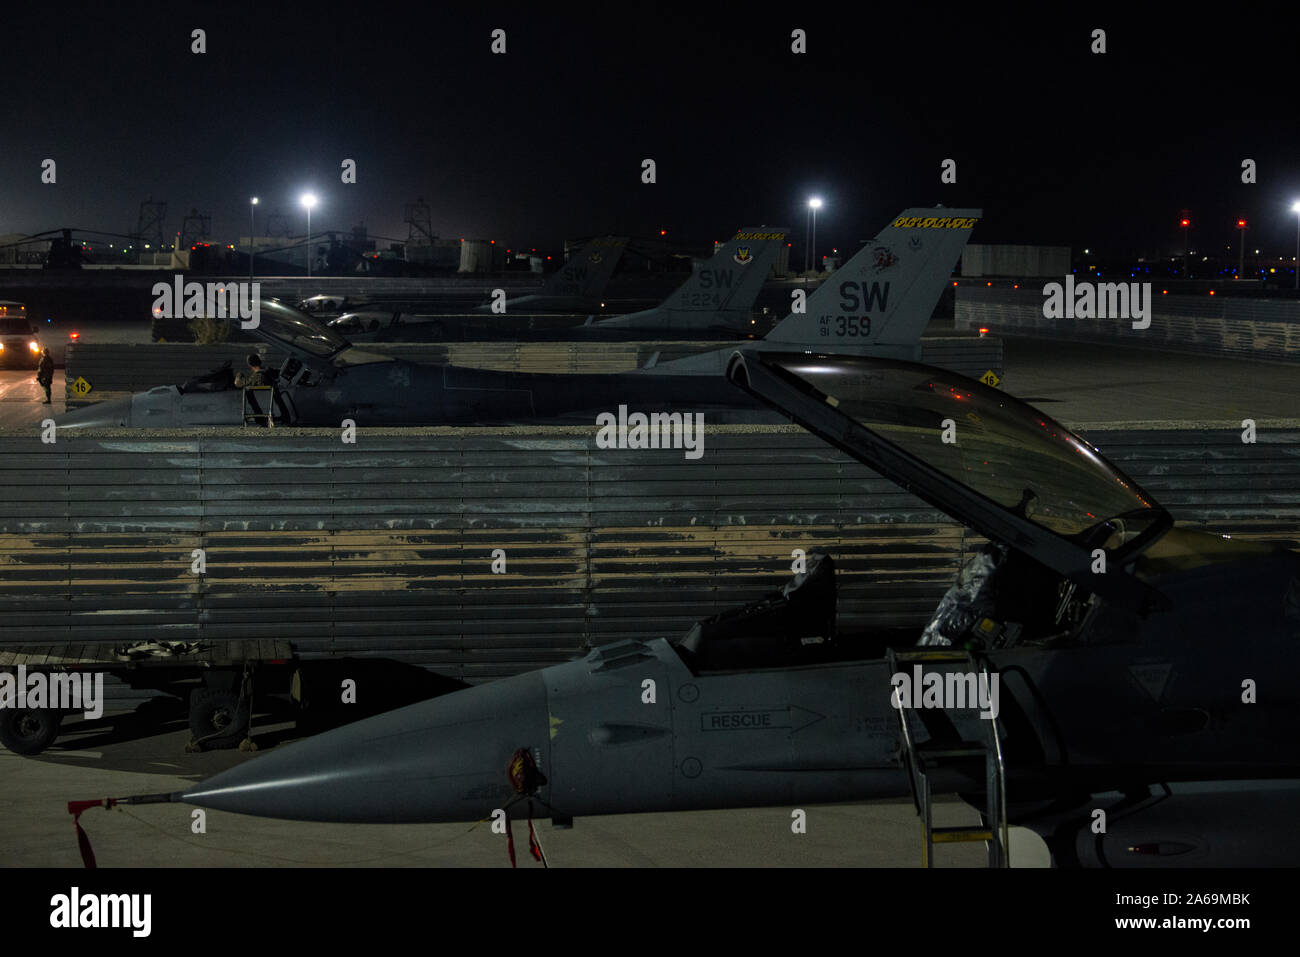 U.S. Air Force F-16 Fighting Falcons from the 79th Fighter Squadron at Shaw Air Force Base, S.C., arrive at Bagram Airfield, Afghanistan, Oct. 25, 2019. While assigned to the 455th Air Expeditionary Wing at Bagram, the F-16s will help provide decisive airpower through the U.S. Central Command area of responsibility. The airpower the wing provides ensures NATO forces can focus on their mission to train, advise and assist. (U.S. Air Force photo by Staff Sgt. Matthew Lotz) Stock Photo